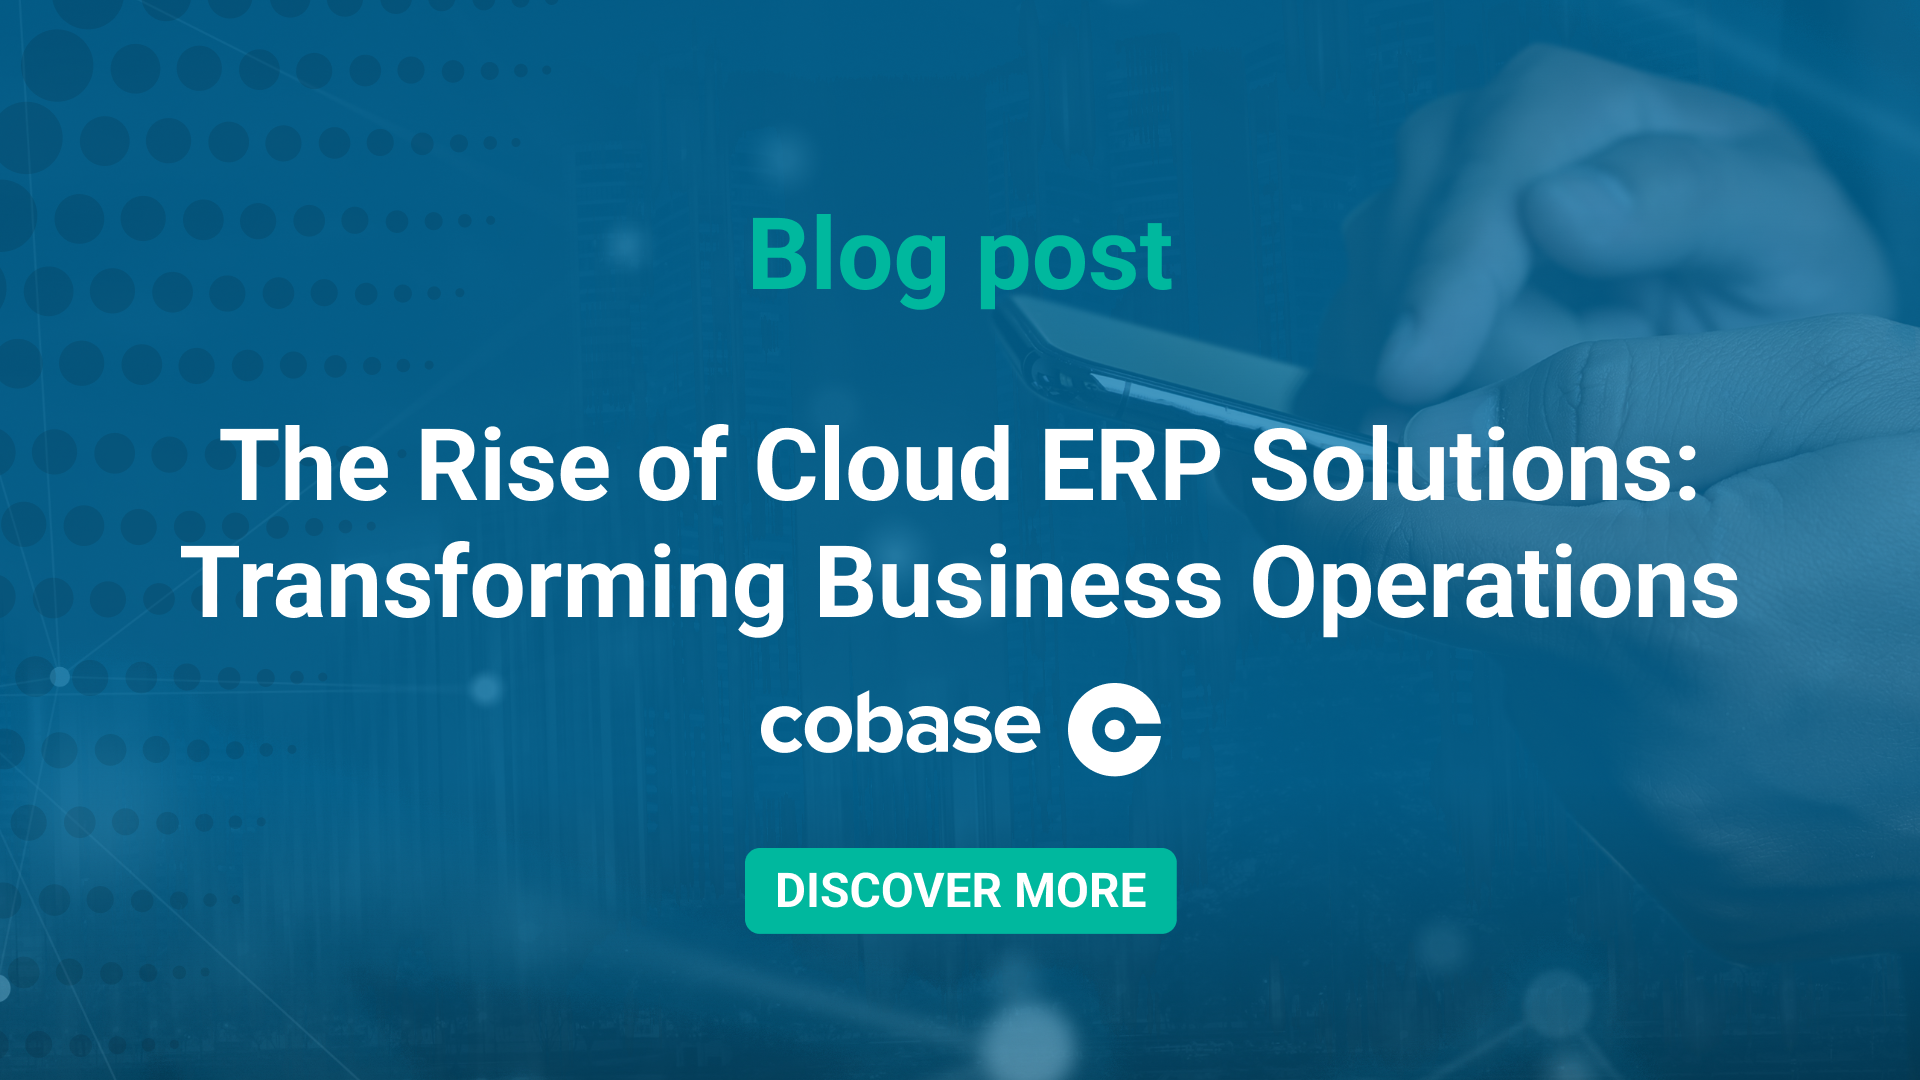 The Rise of Cloud ERP Solutions: Transforming Business Operations